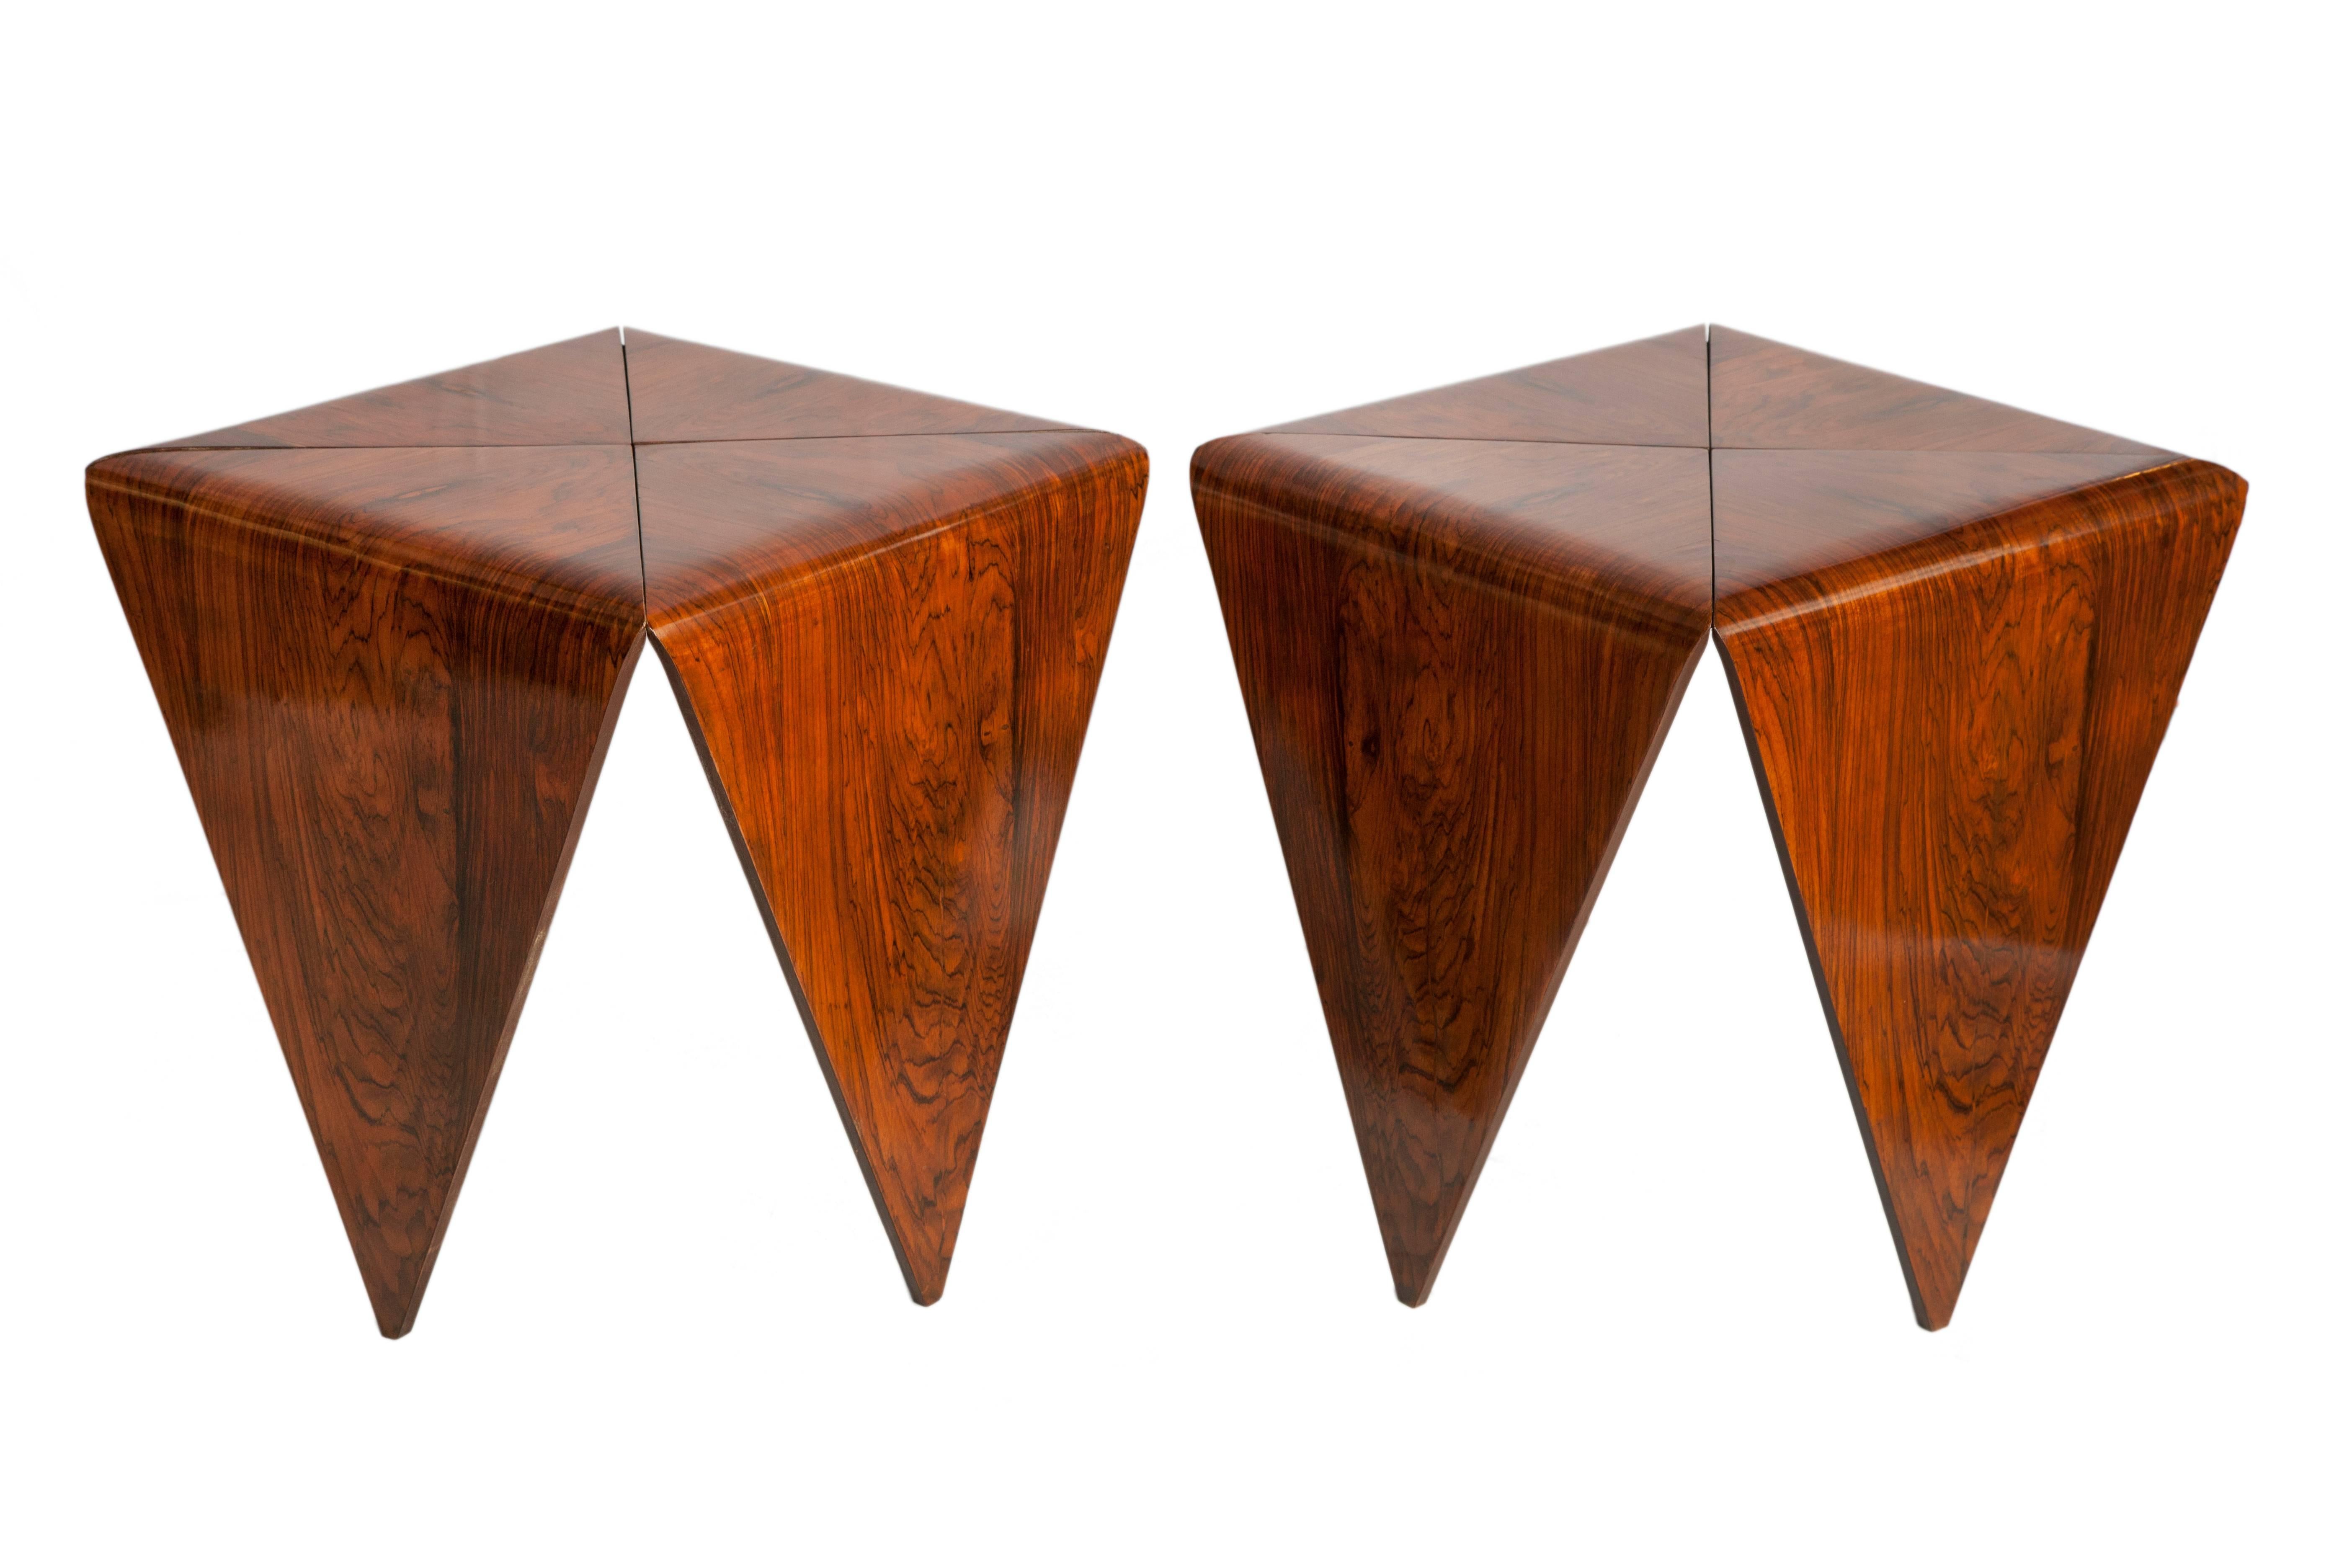 A pair of Jorge Zalszupin 'Petala' side and end tables in stunning jacaranda, manufactured circa 1960s. These Brazilian Mid-Century Modern tables have been crafted into linear, highly modernistic forms. Good vintage condition, wear consistent with